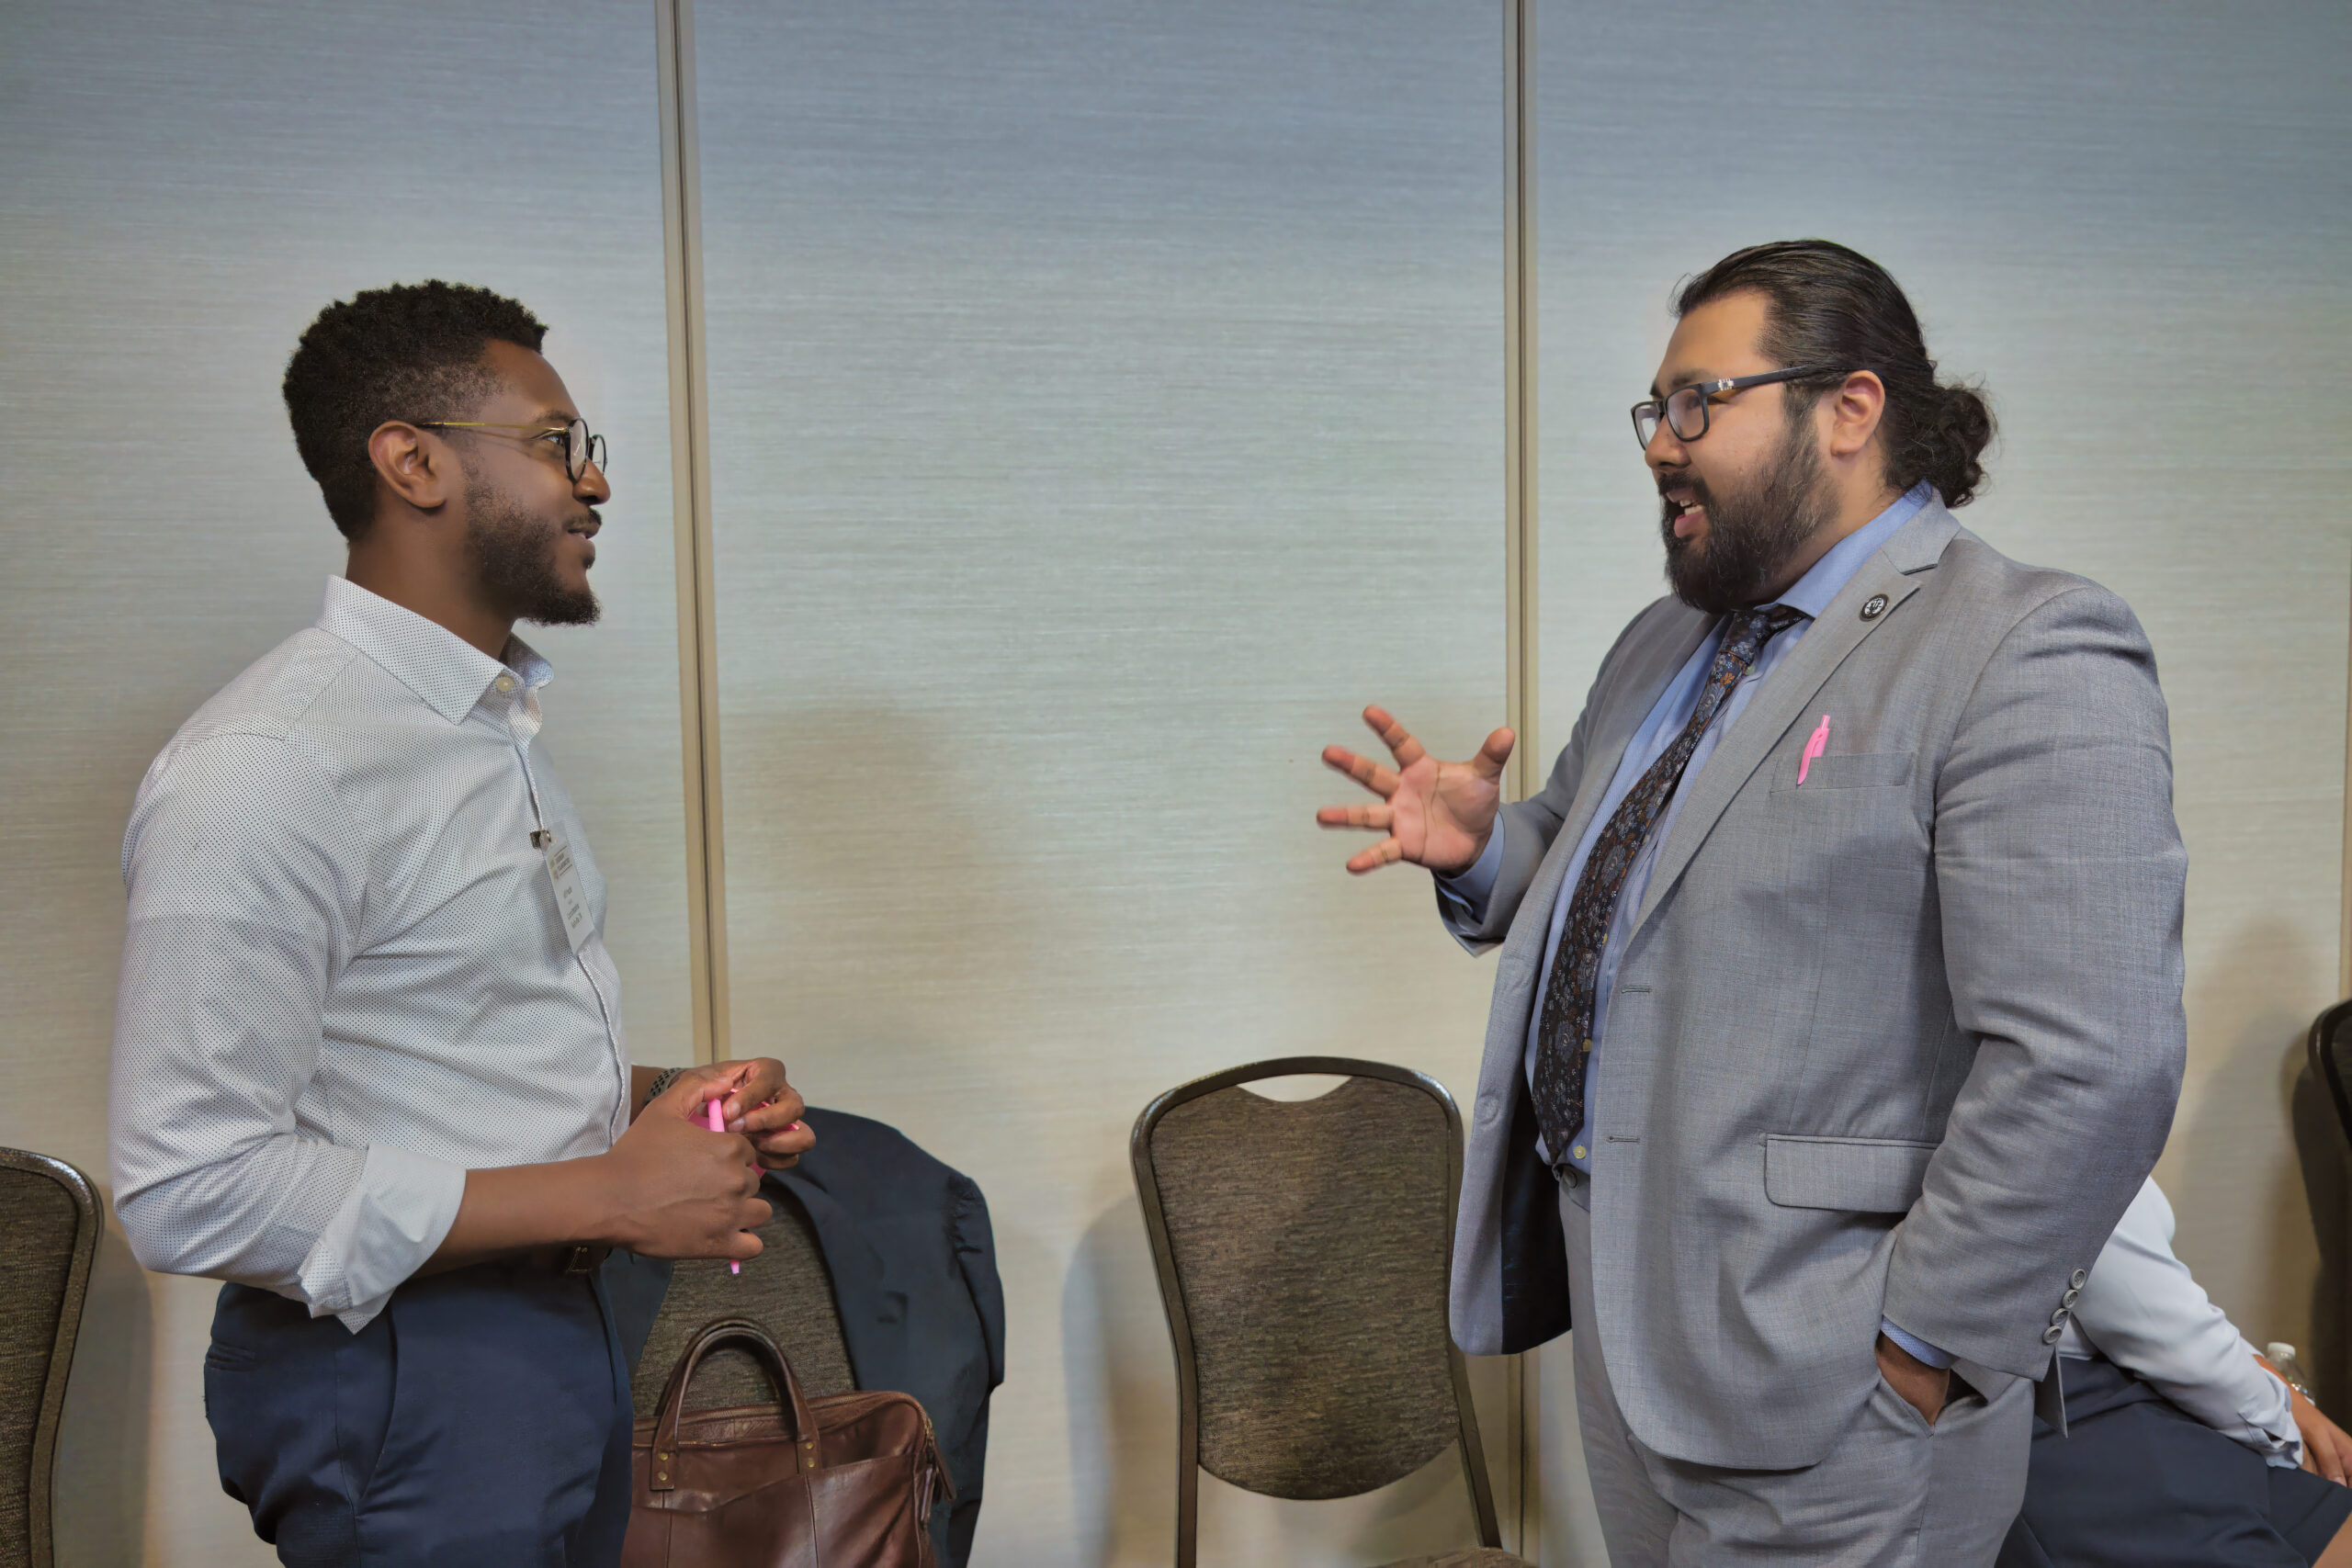 LPNC member Mario Benavente speaks with a local elected on the ground in Nashville at a LP event in Nashville, TN.